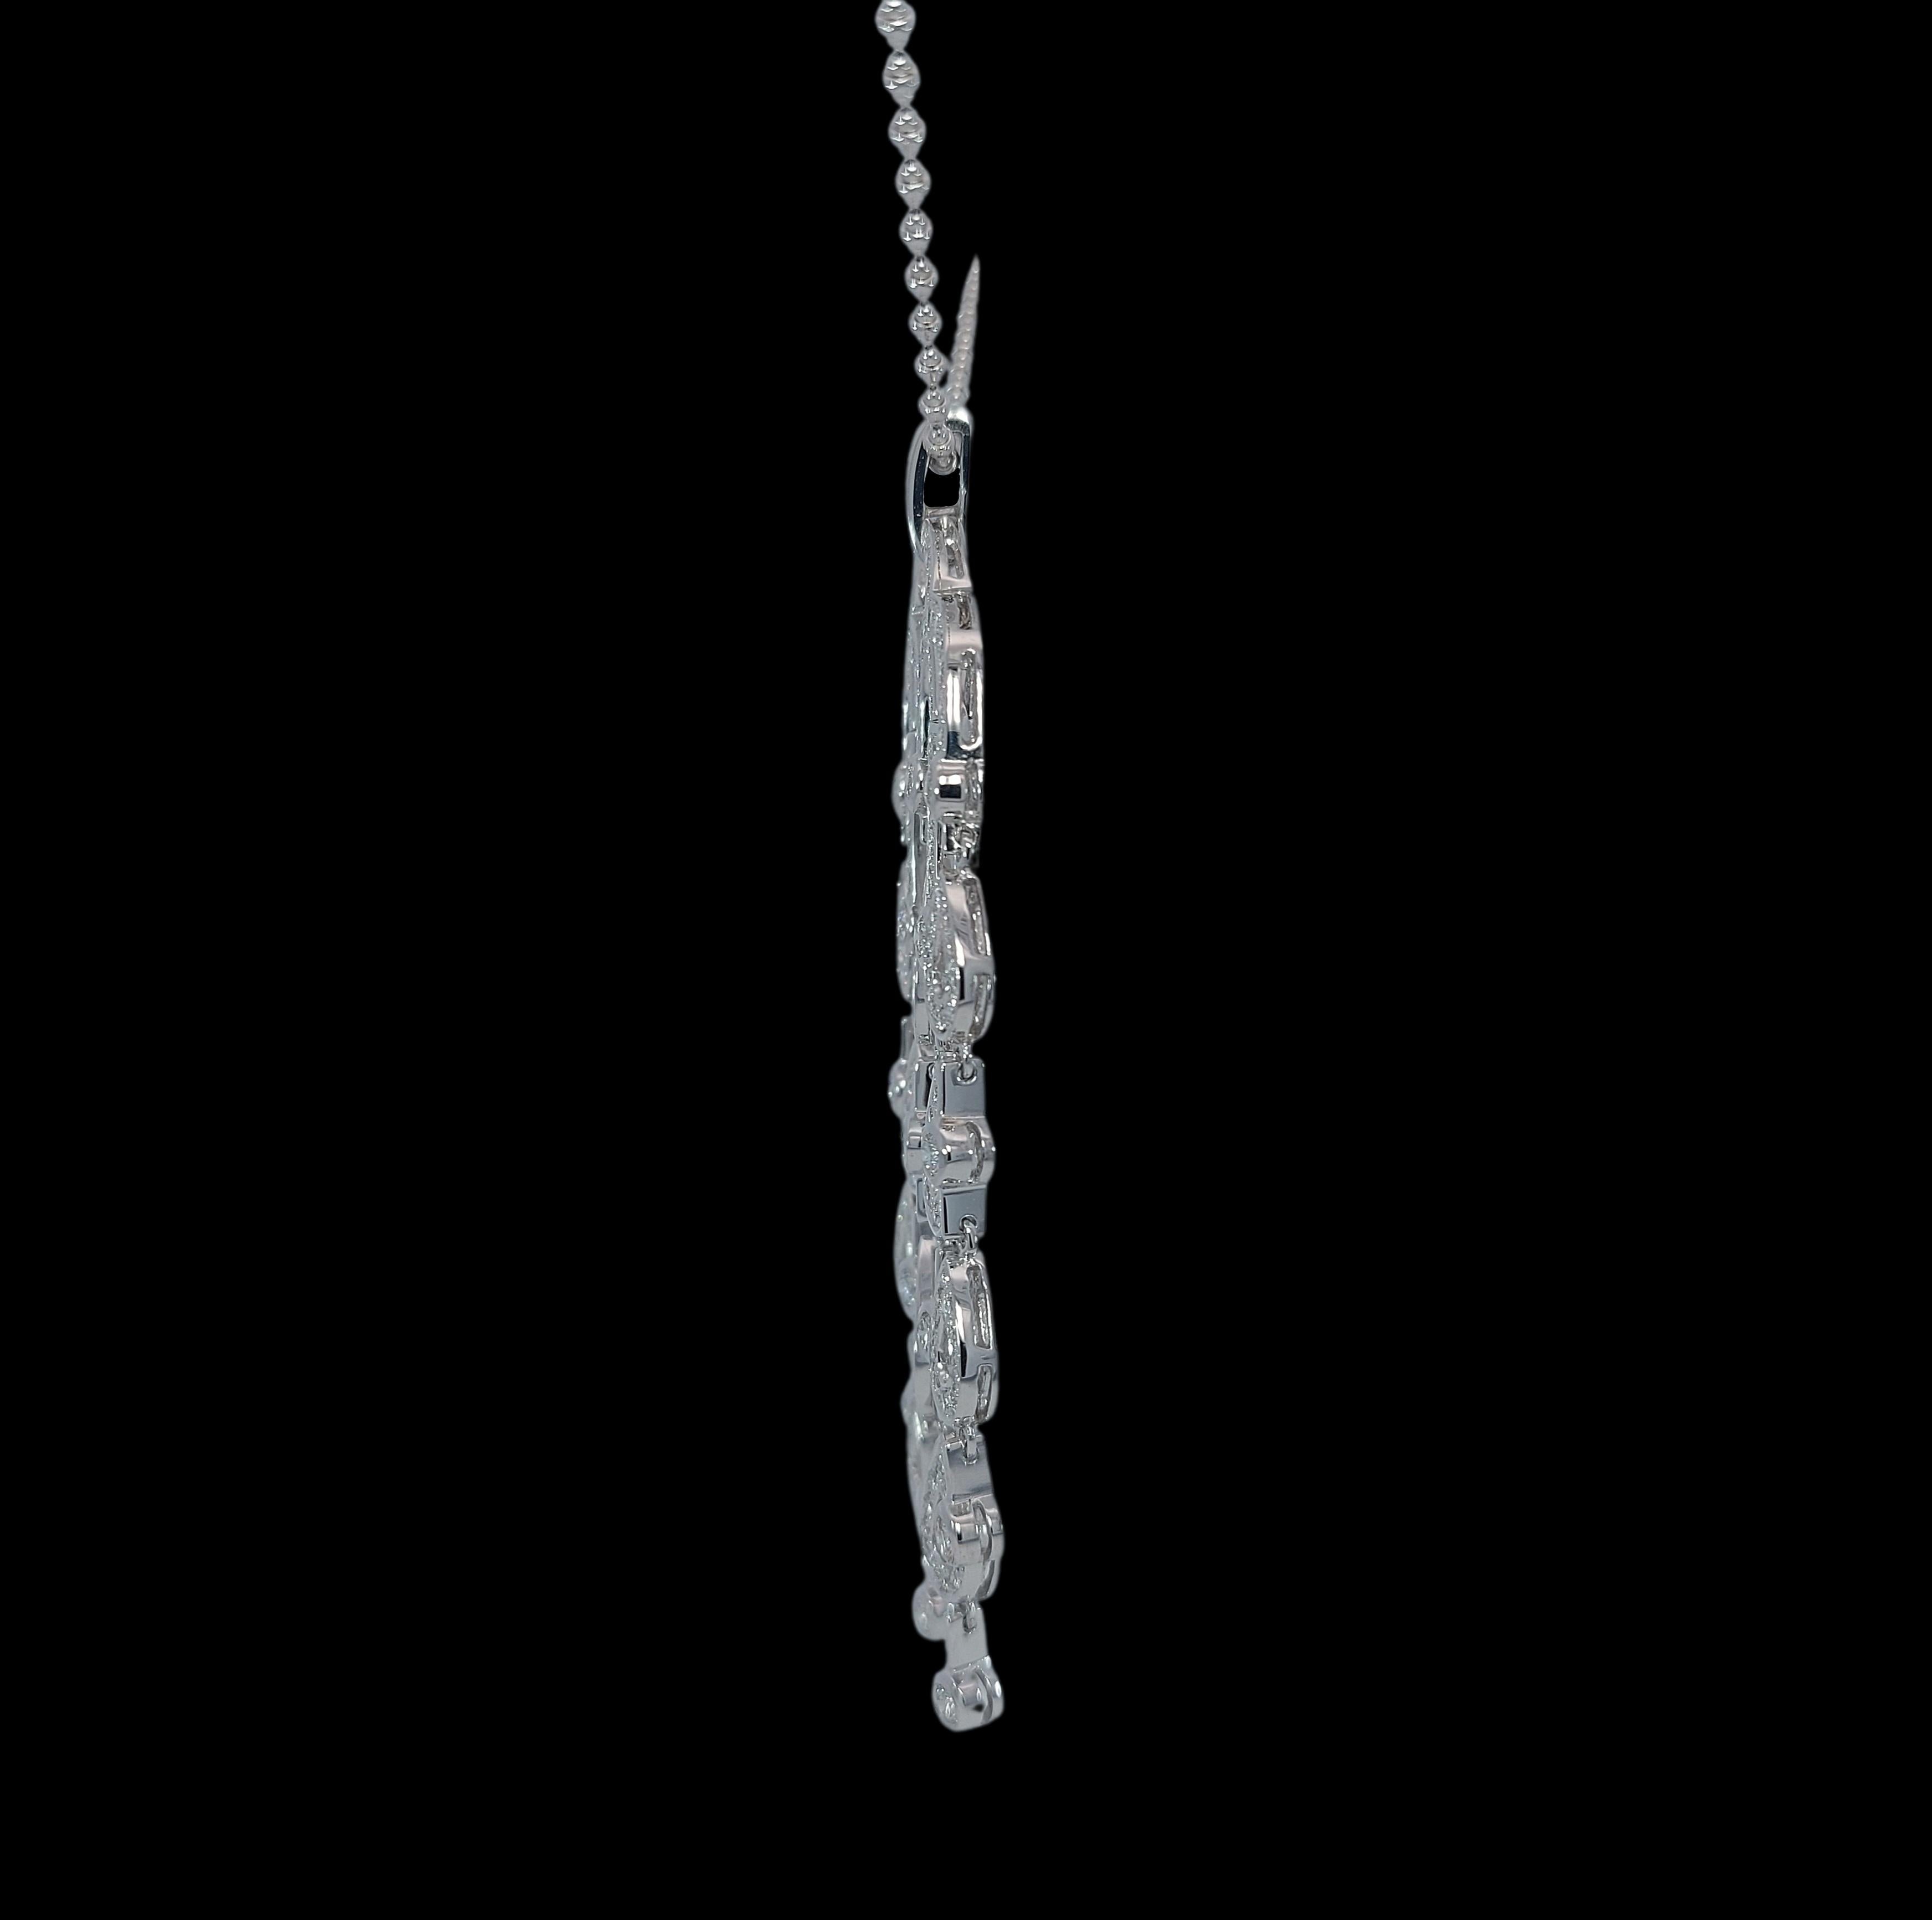 Dangling Chandelier 18kt White Gold Necklace with 5.4ct Diamonds For Sale 2